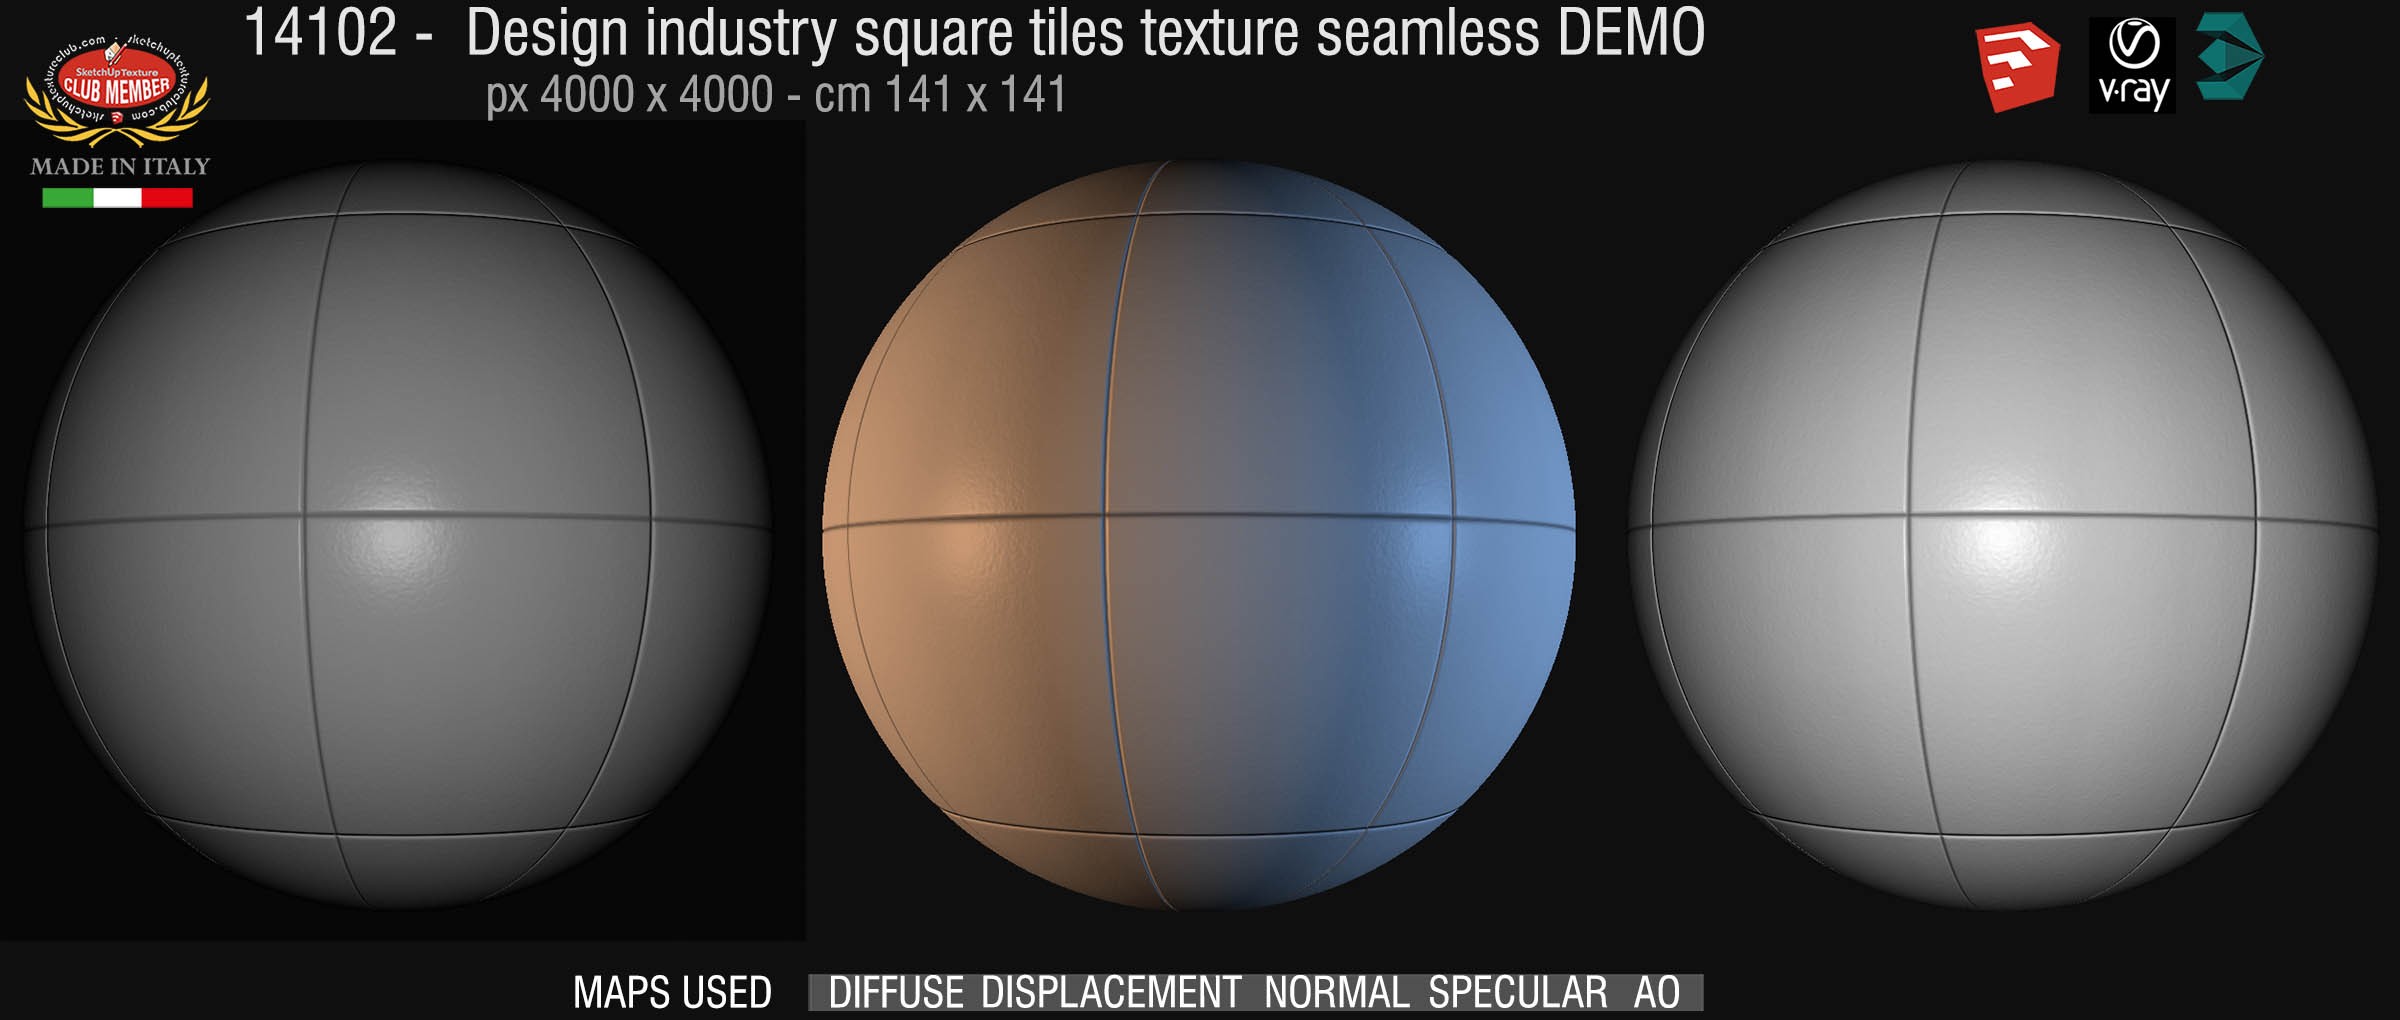 14102 Design industry square tile texture seamless + maps DEMO